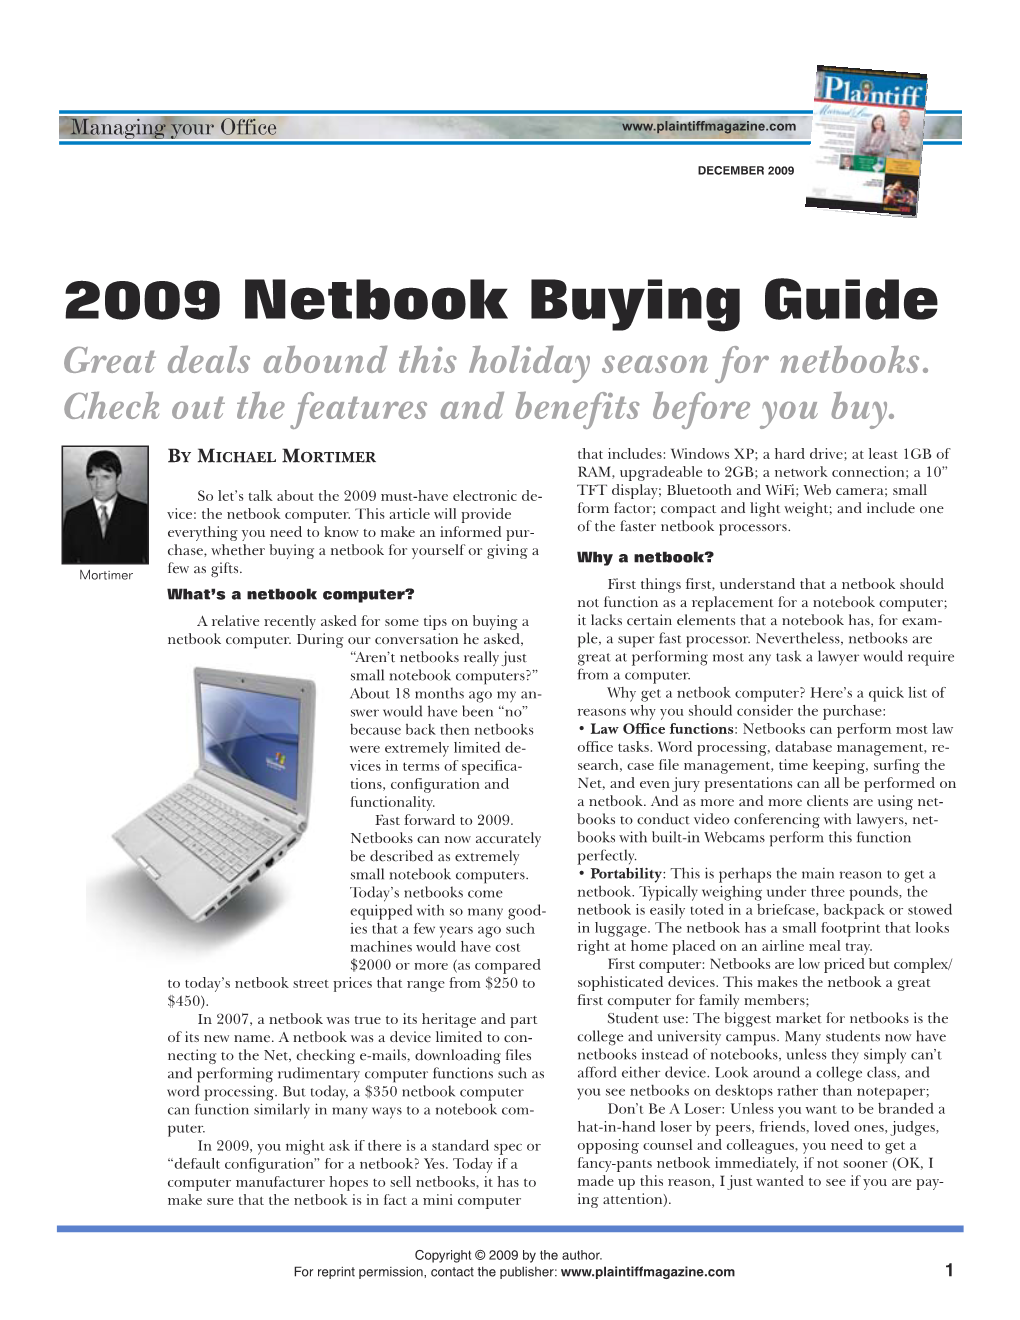 2009 Netbook Buying Guide Great Deals Abound This Holiday Season for Netbooks